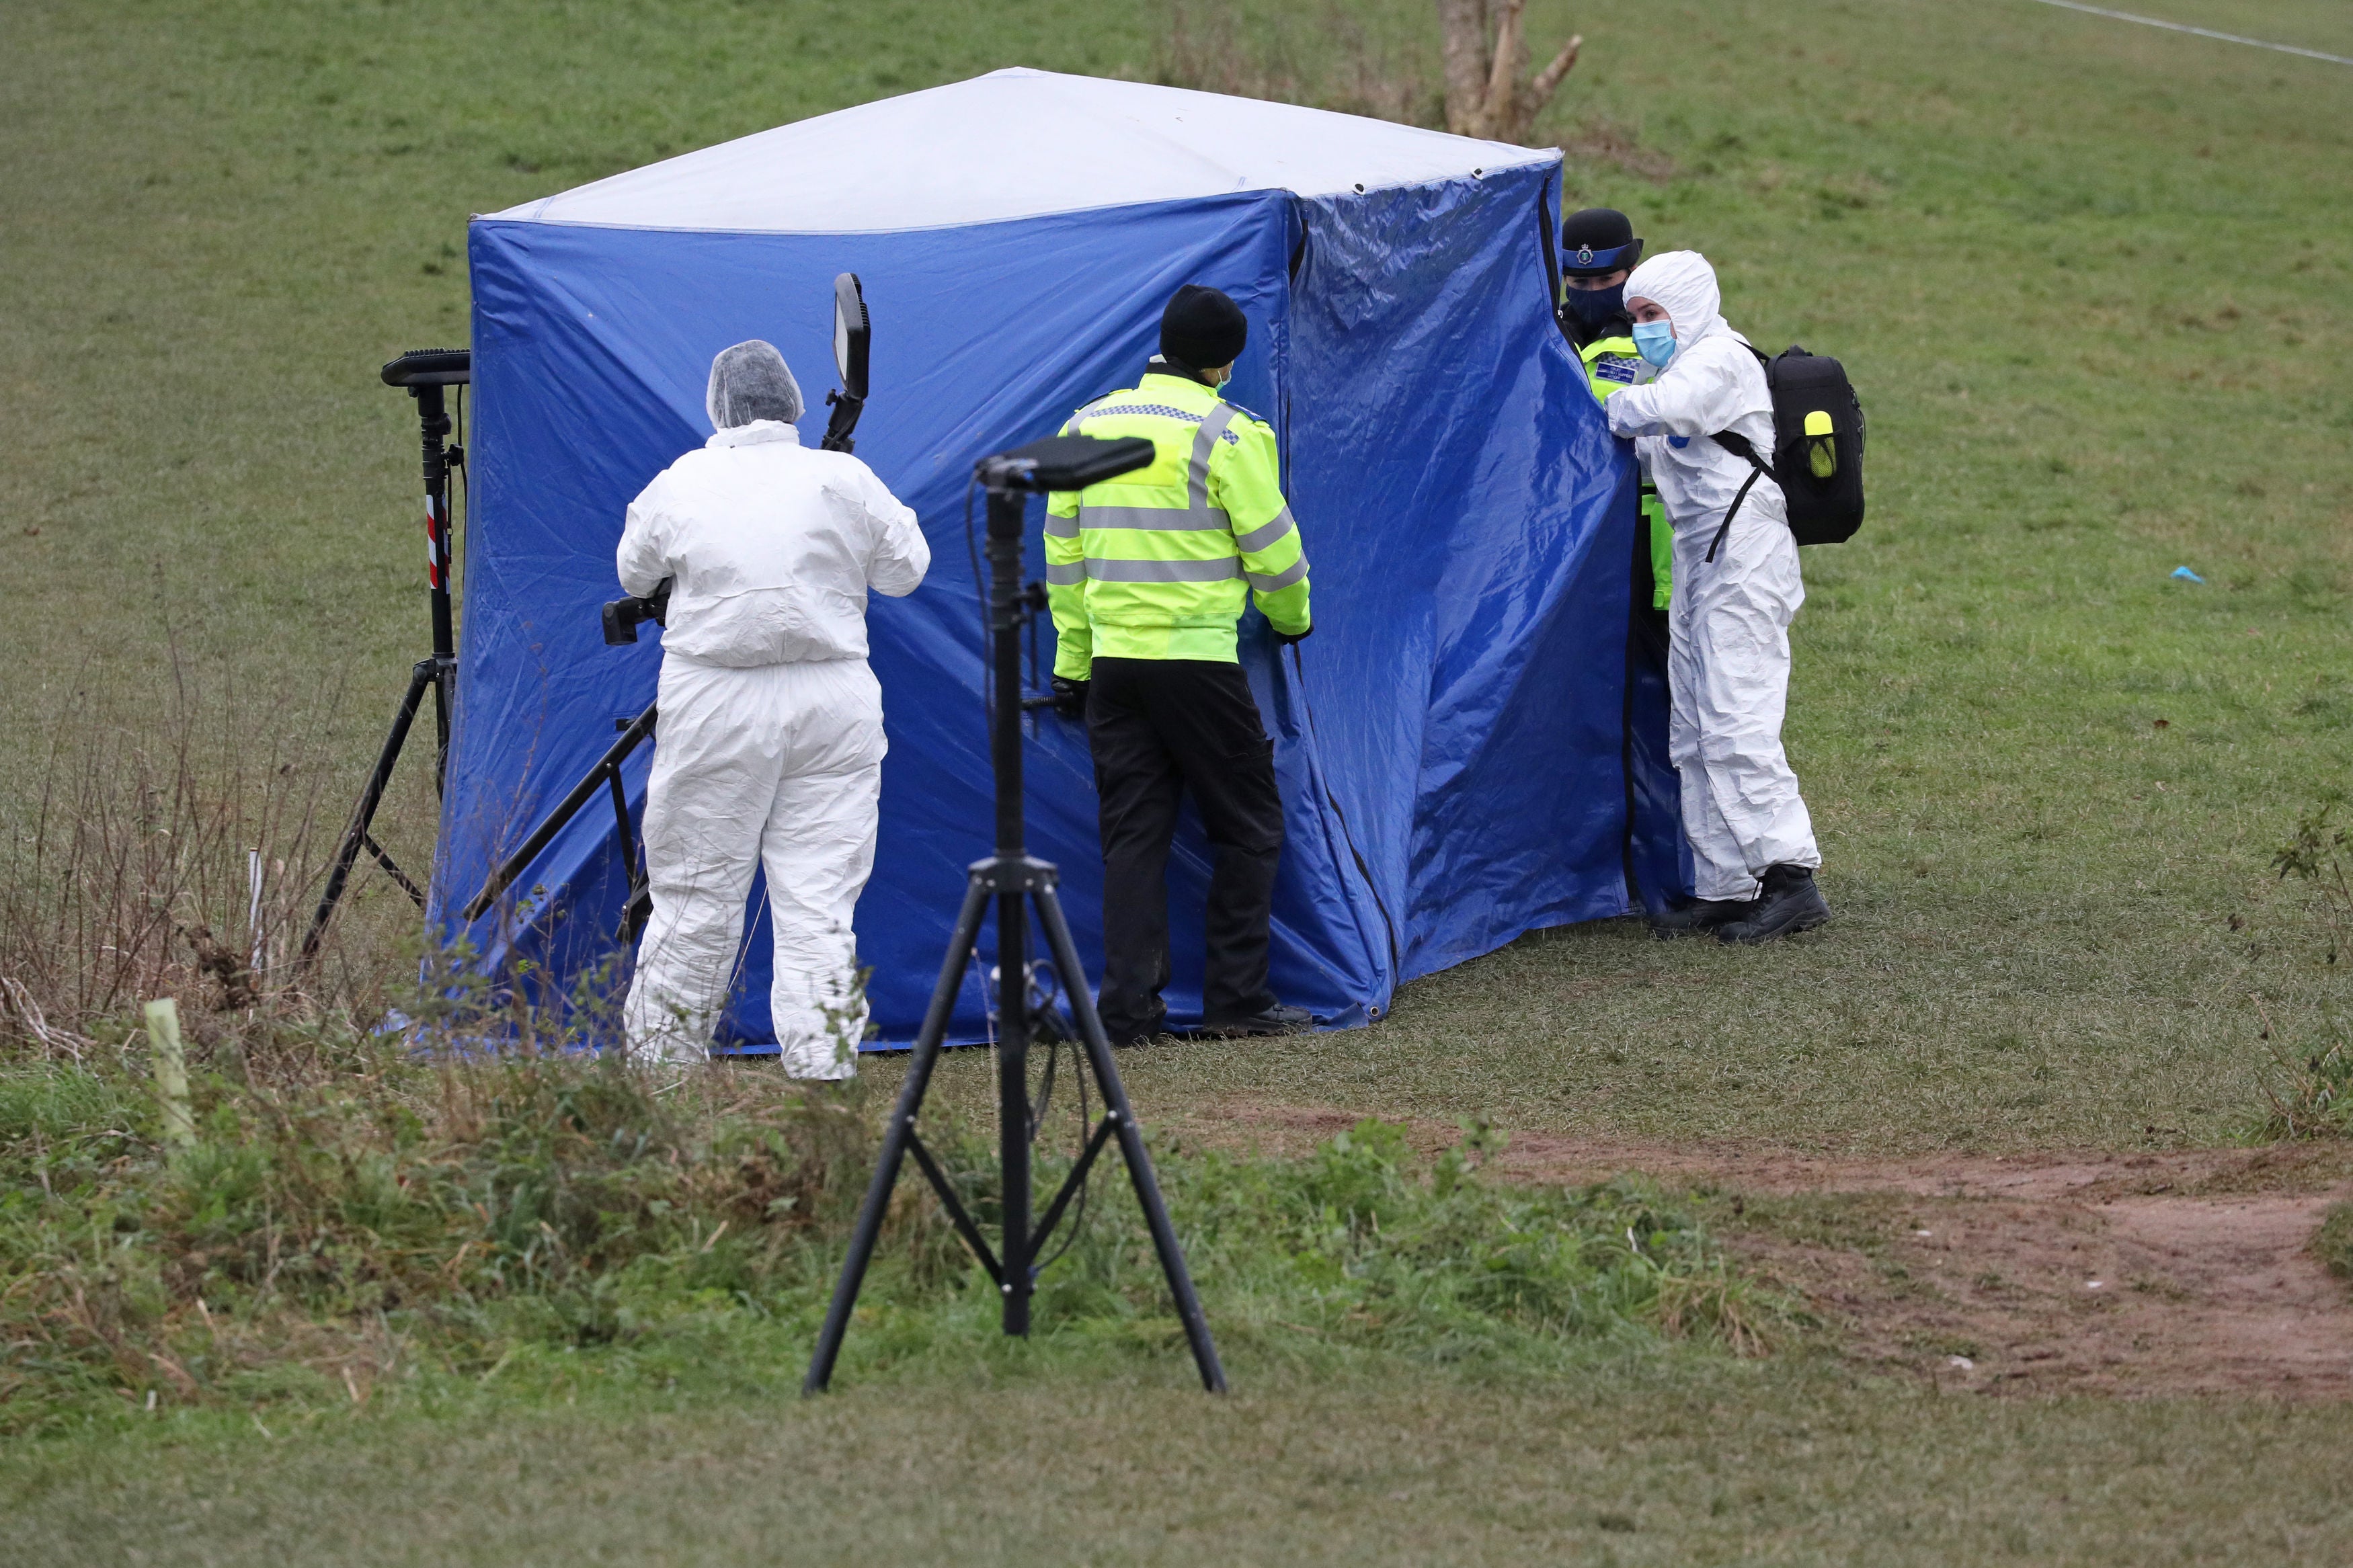 Forensic officers at a tent in Bugs Bottom field in Emmer Green, Reading, where a 13-year-old boy died after being stabbed